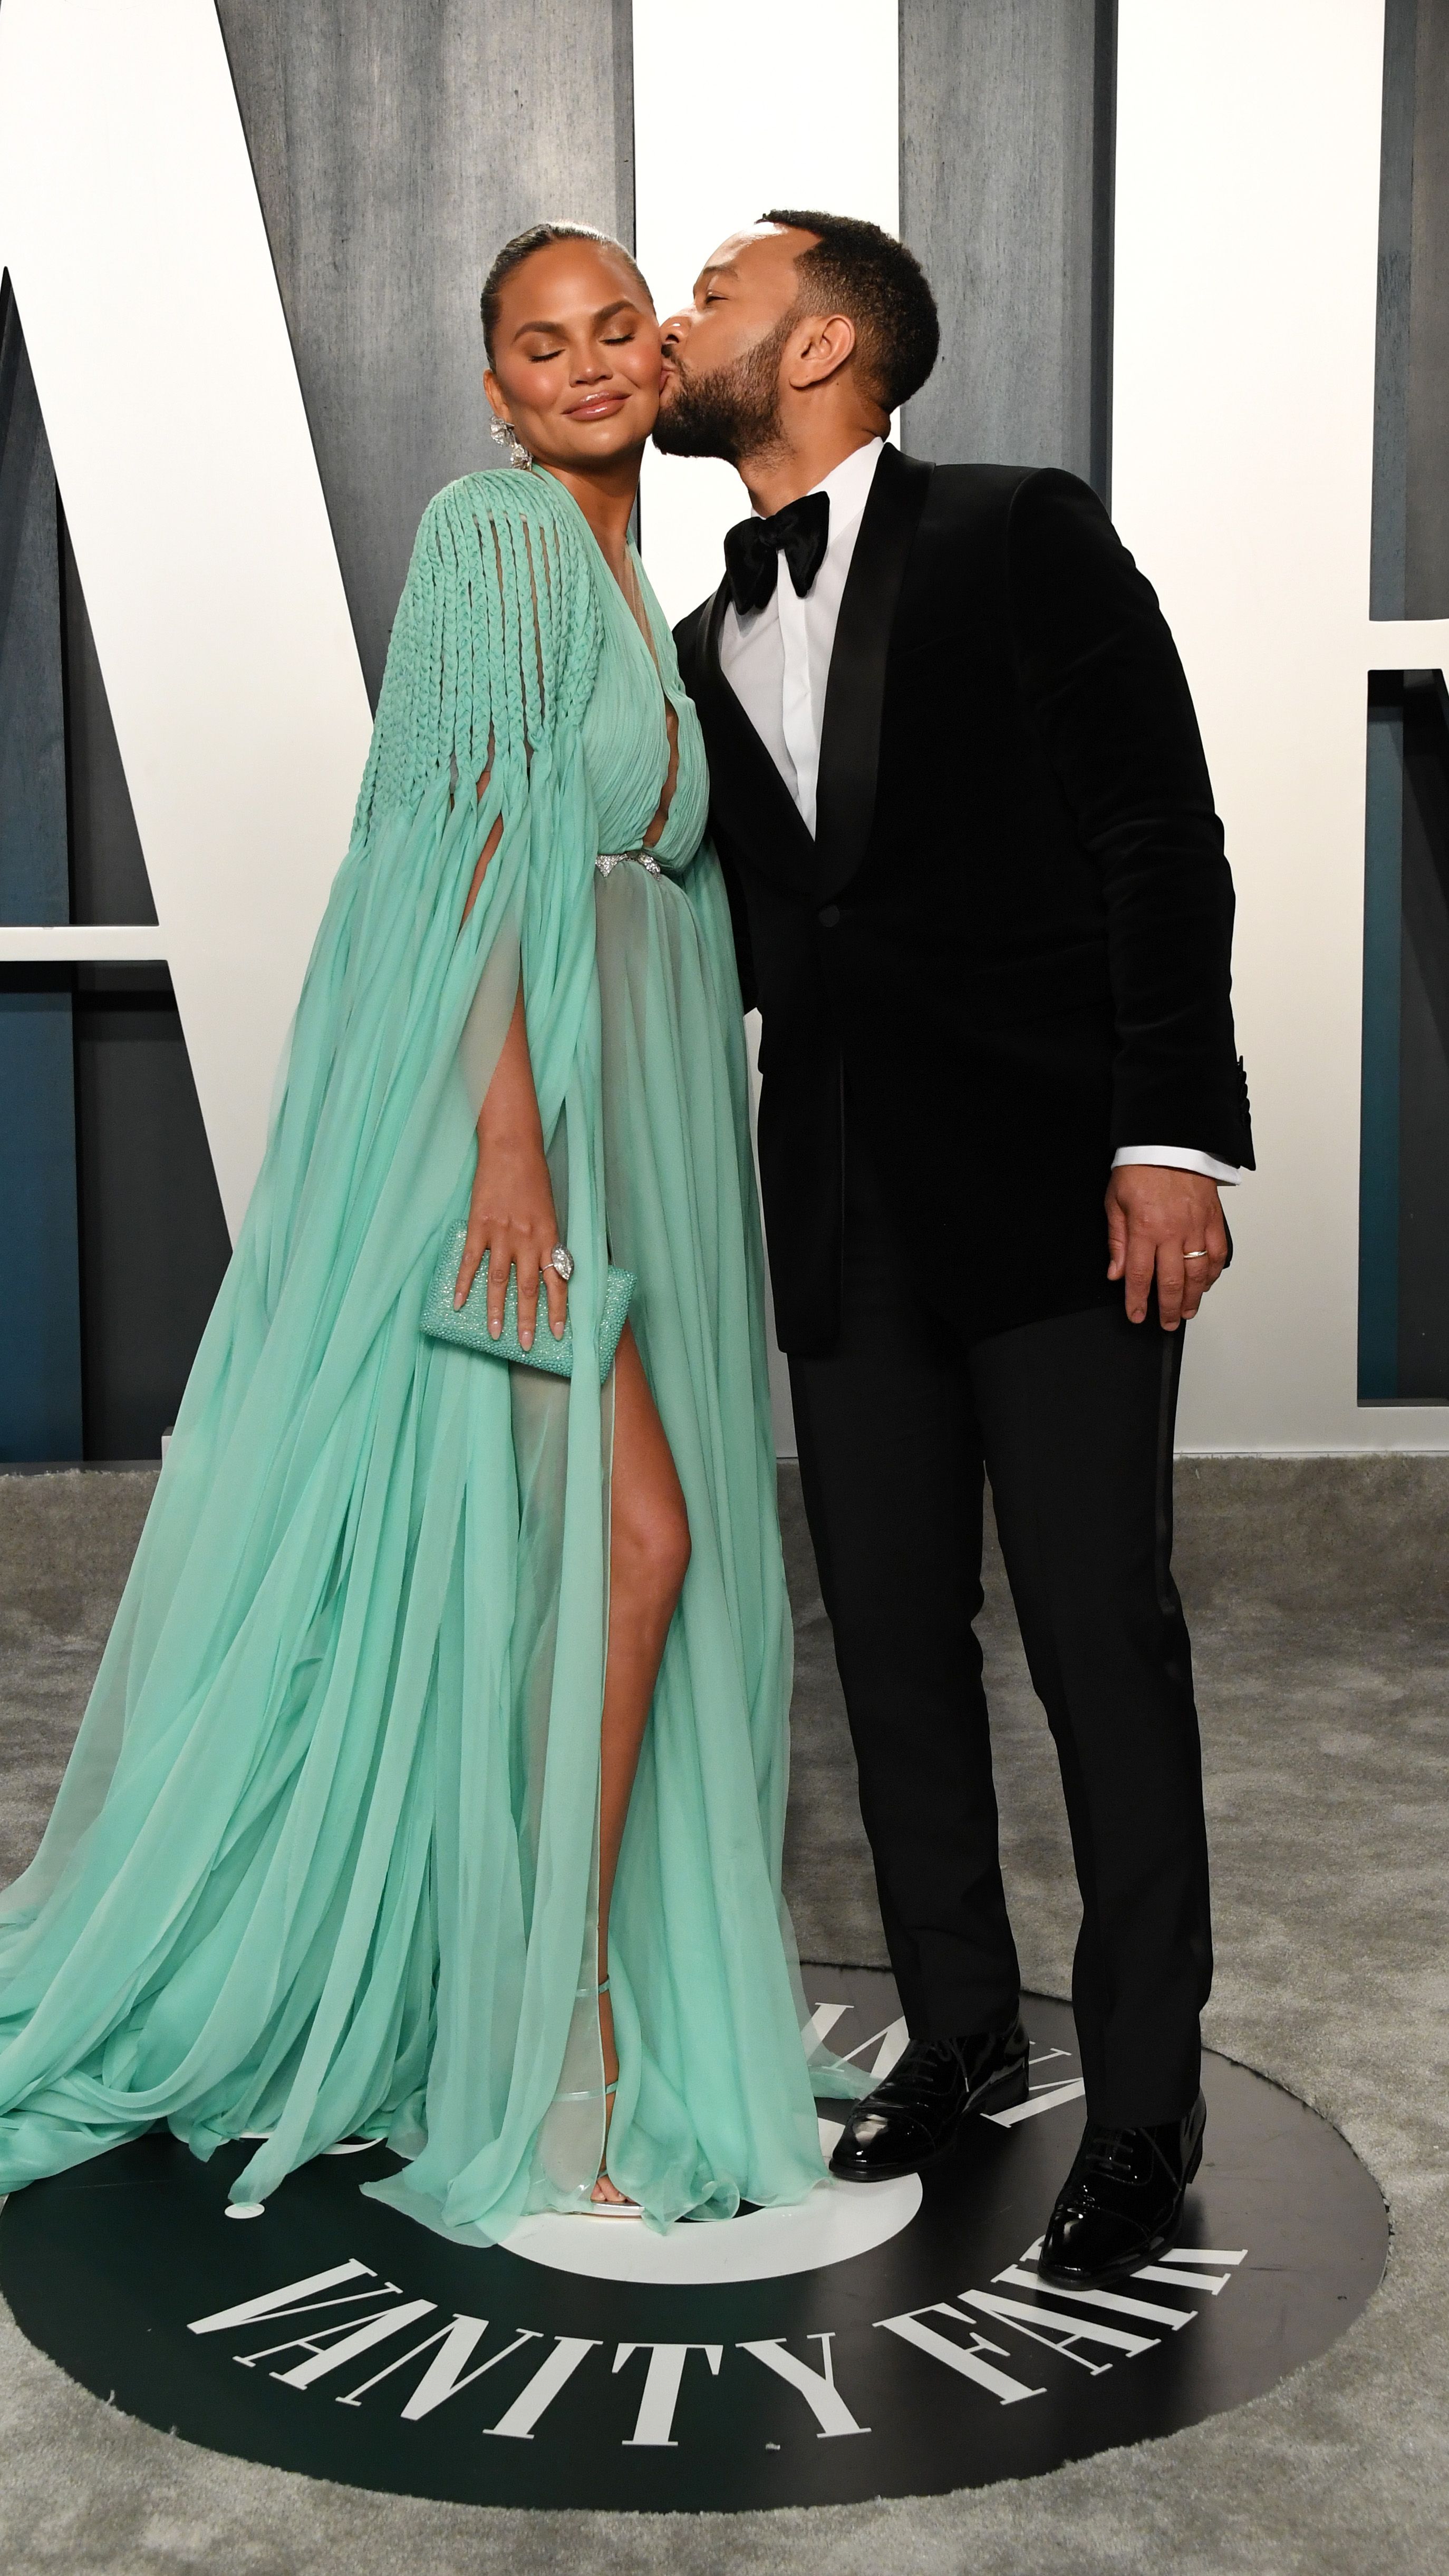 Chrissy Teigen and John Legend at the Vanity Fair Oscar party| Photo: Getty Images